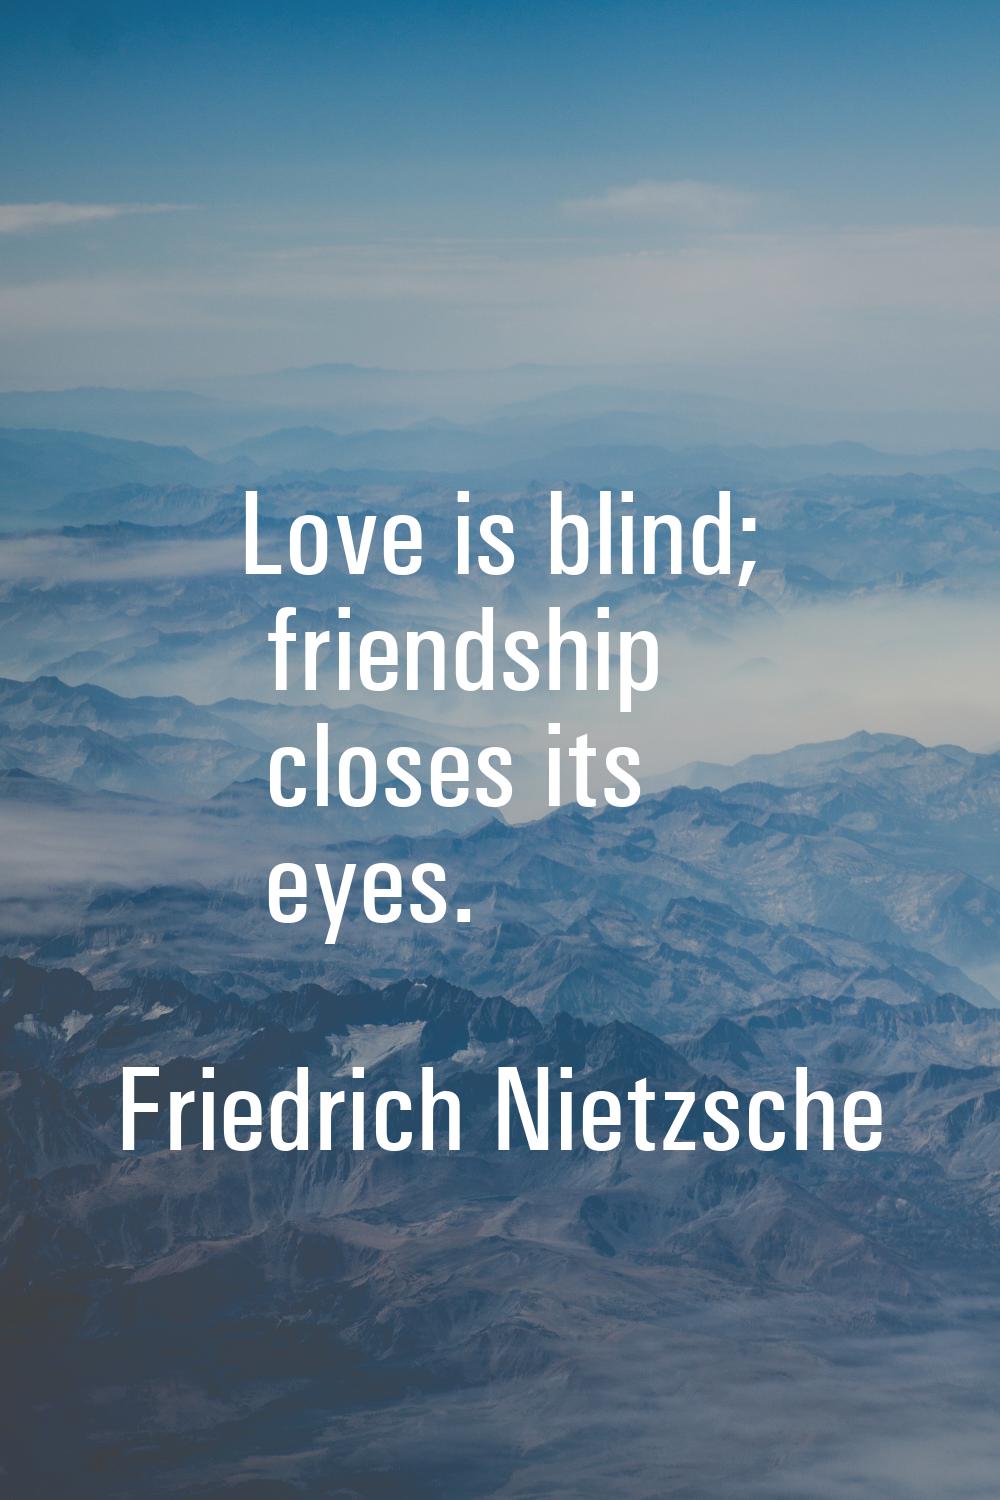 Love is blind; friendship closes its eyes.